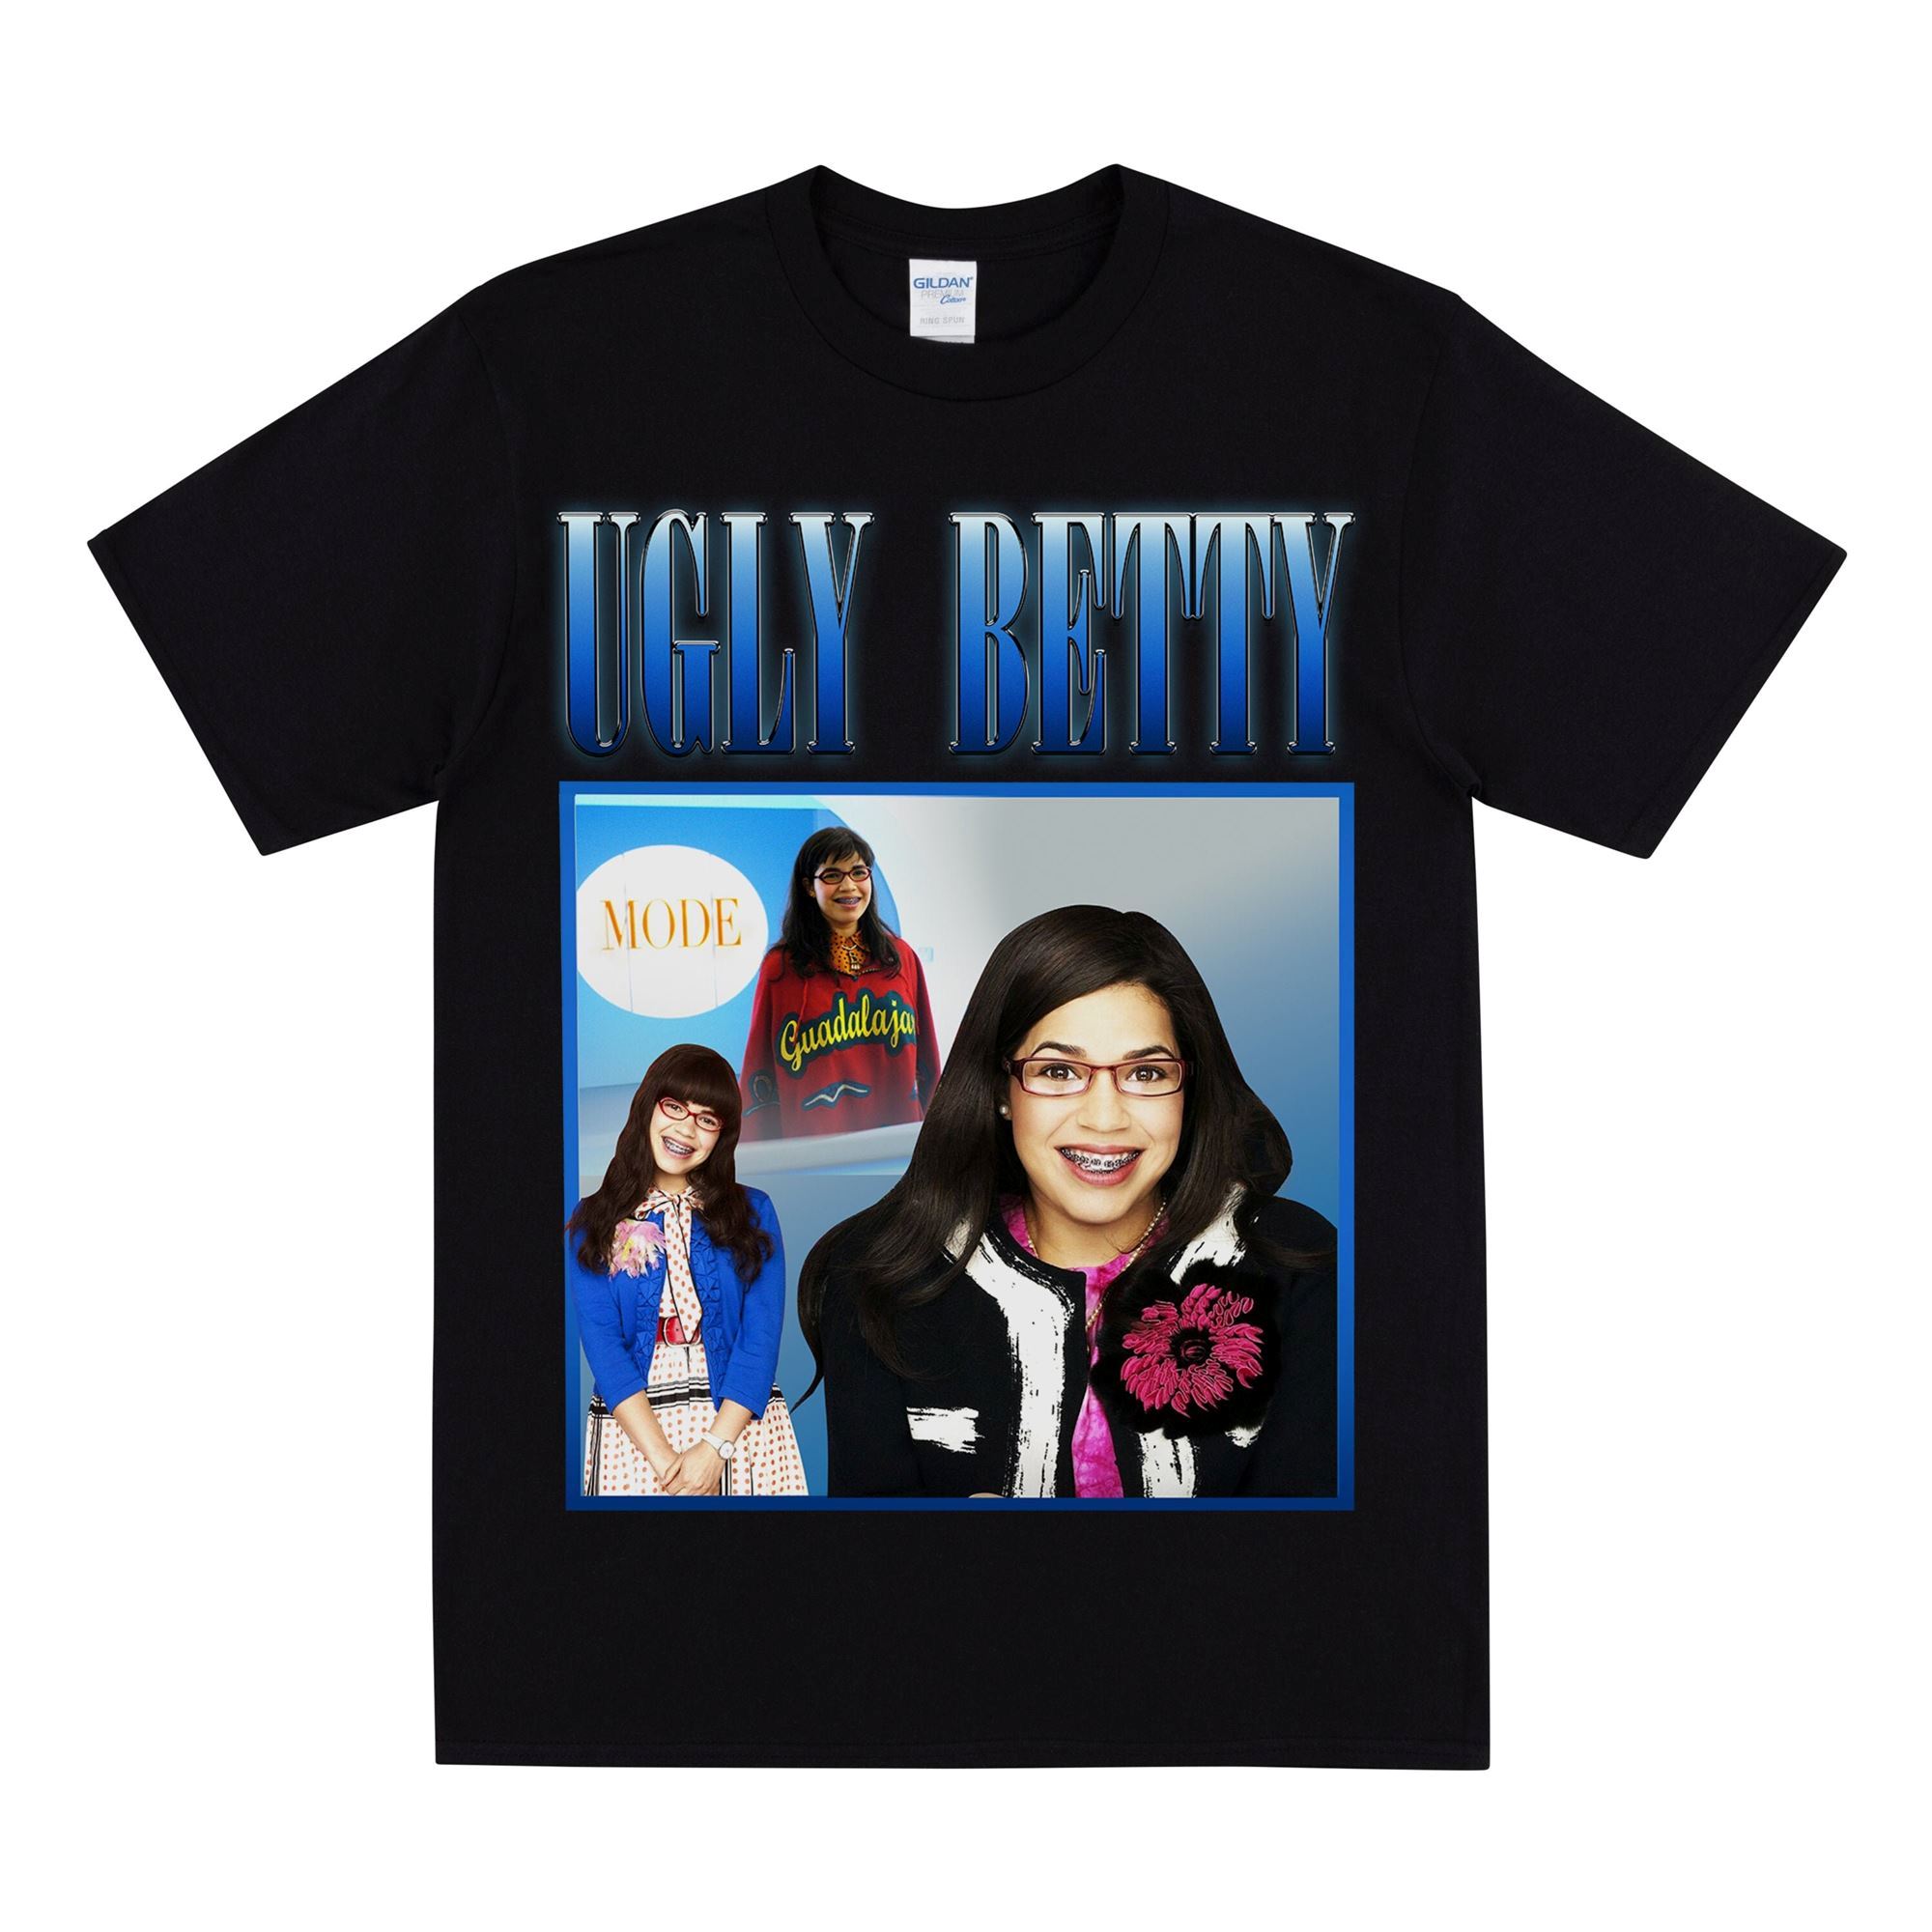 Promotions Ugly Betty Tribute Tshirt For Her Mode Fashion Magazine Telenovela Style T-shirt Girlfriend Wife Gift Vintage 2000s Tee 